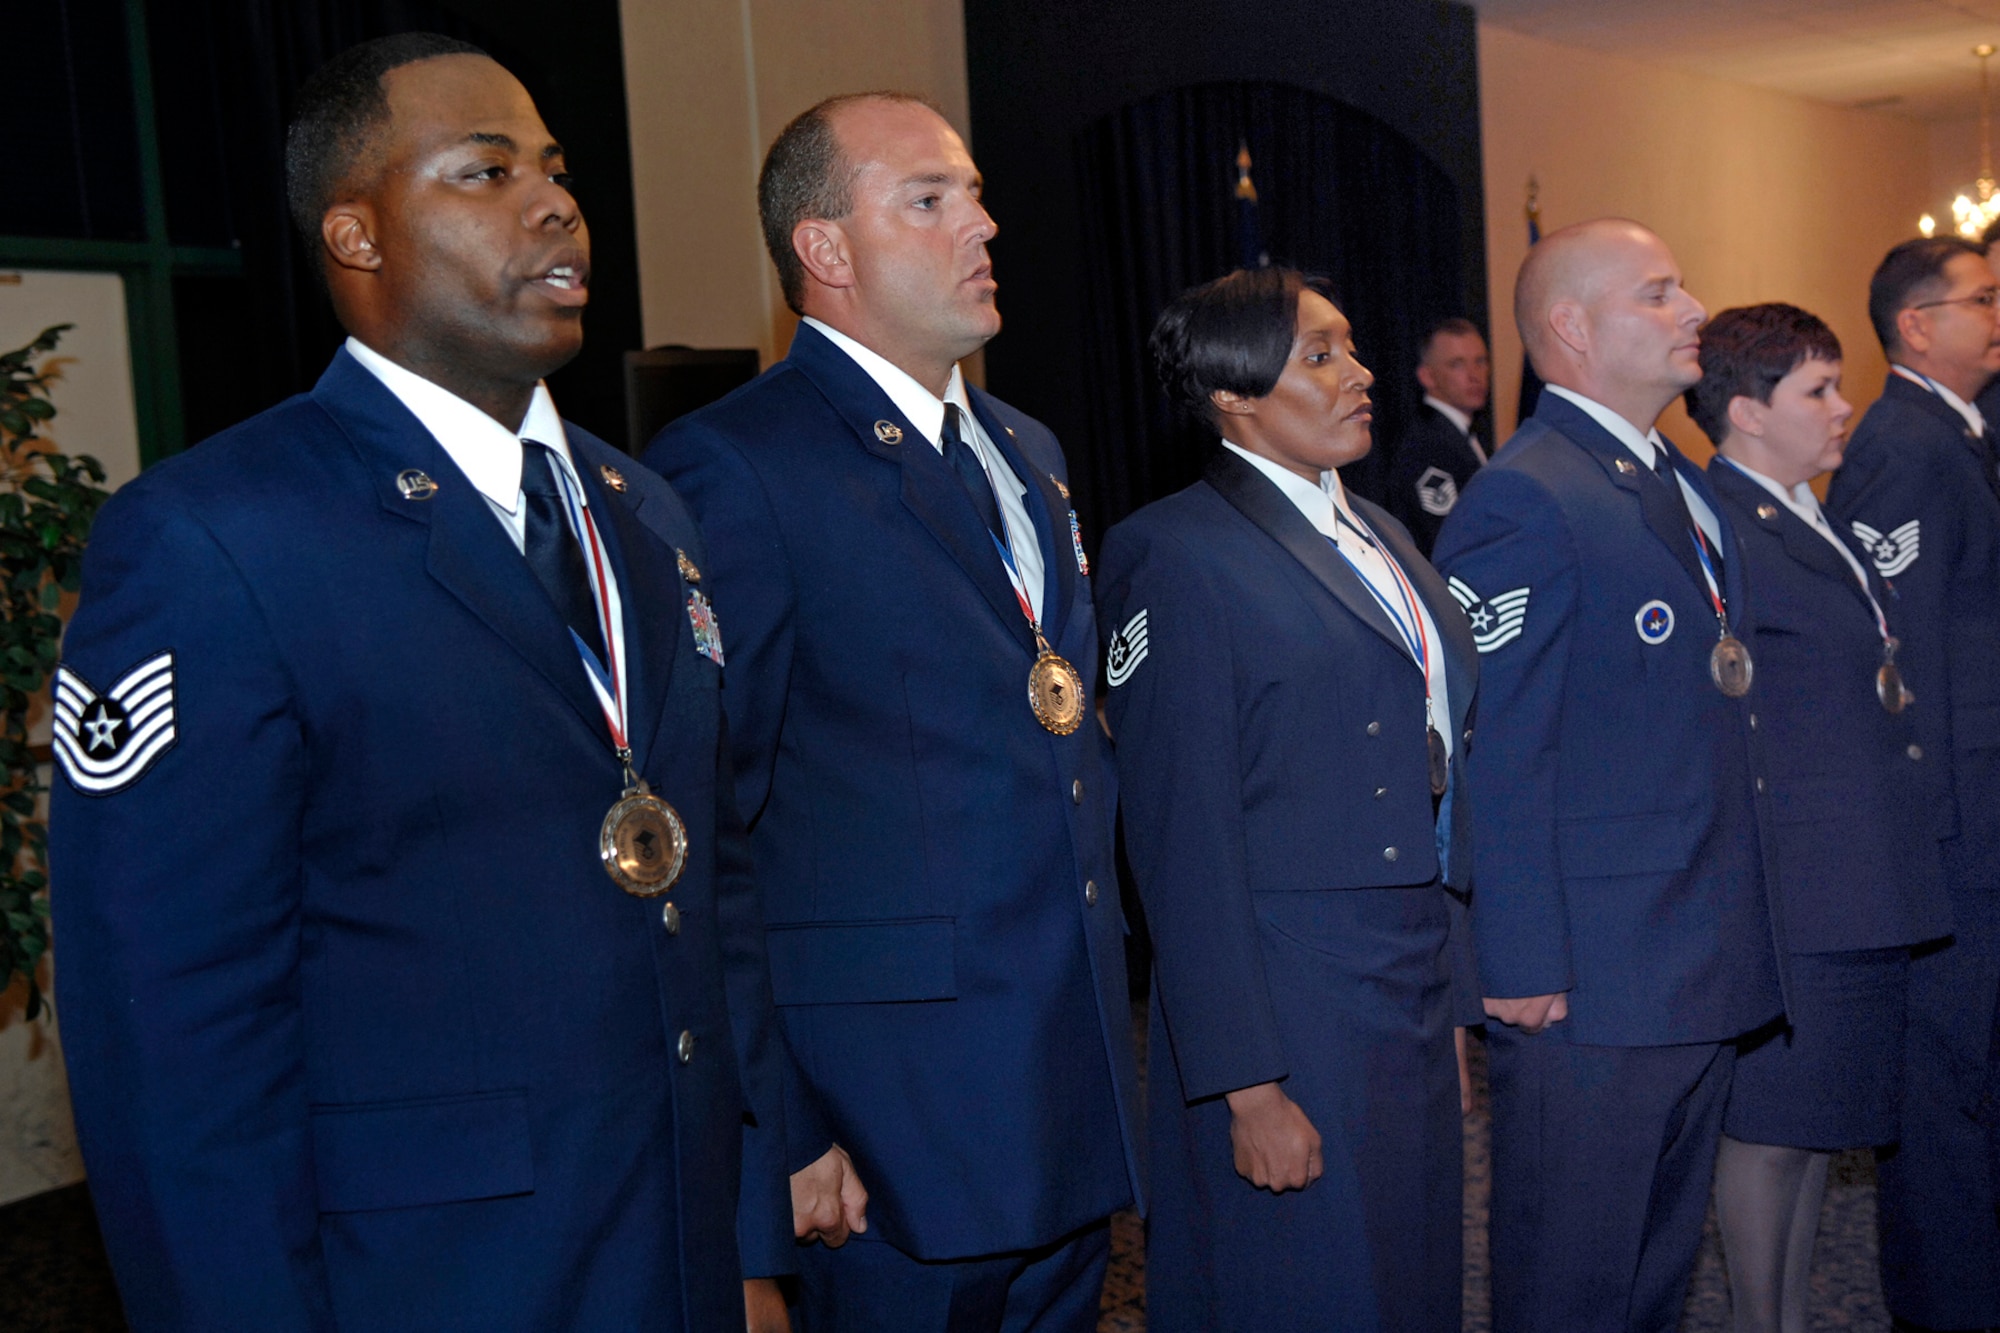 Honorees of the Ellsworth Top Three Association senior NCO induction ceremony recite the Airman's Creed Aug. 13 at the Dakota's club. Forty-three master sergeant selects were honored during the ceremony. (U.S. Air Force photo/Senior Airman Marc I. Lane)